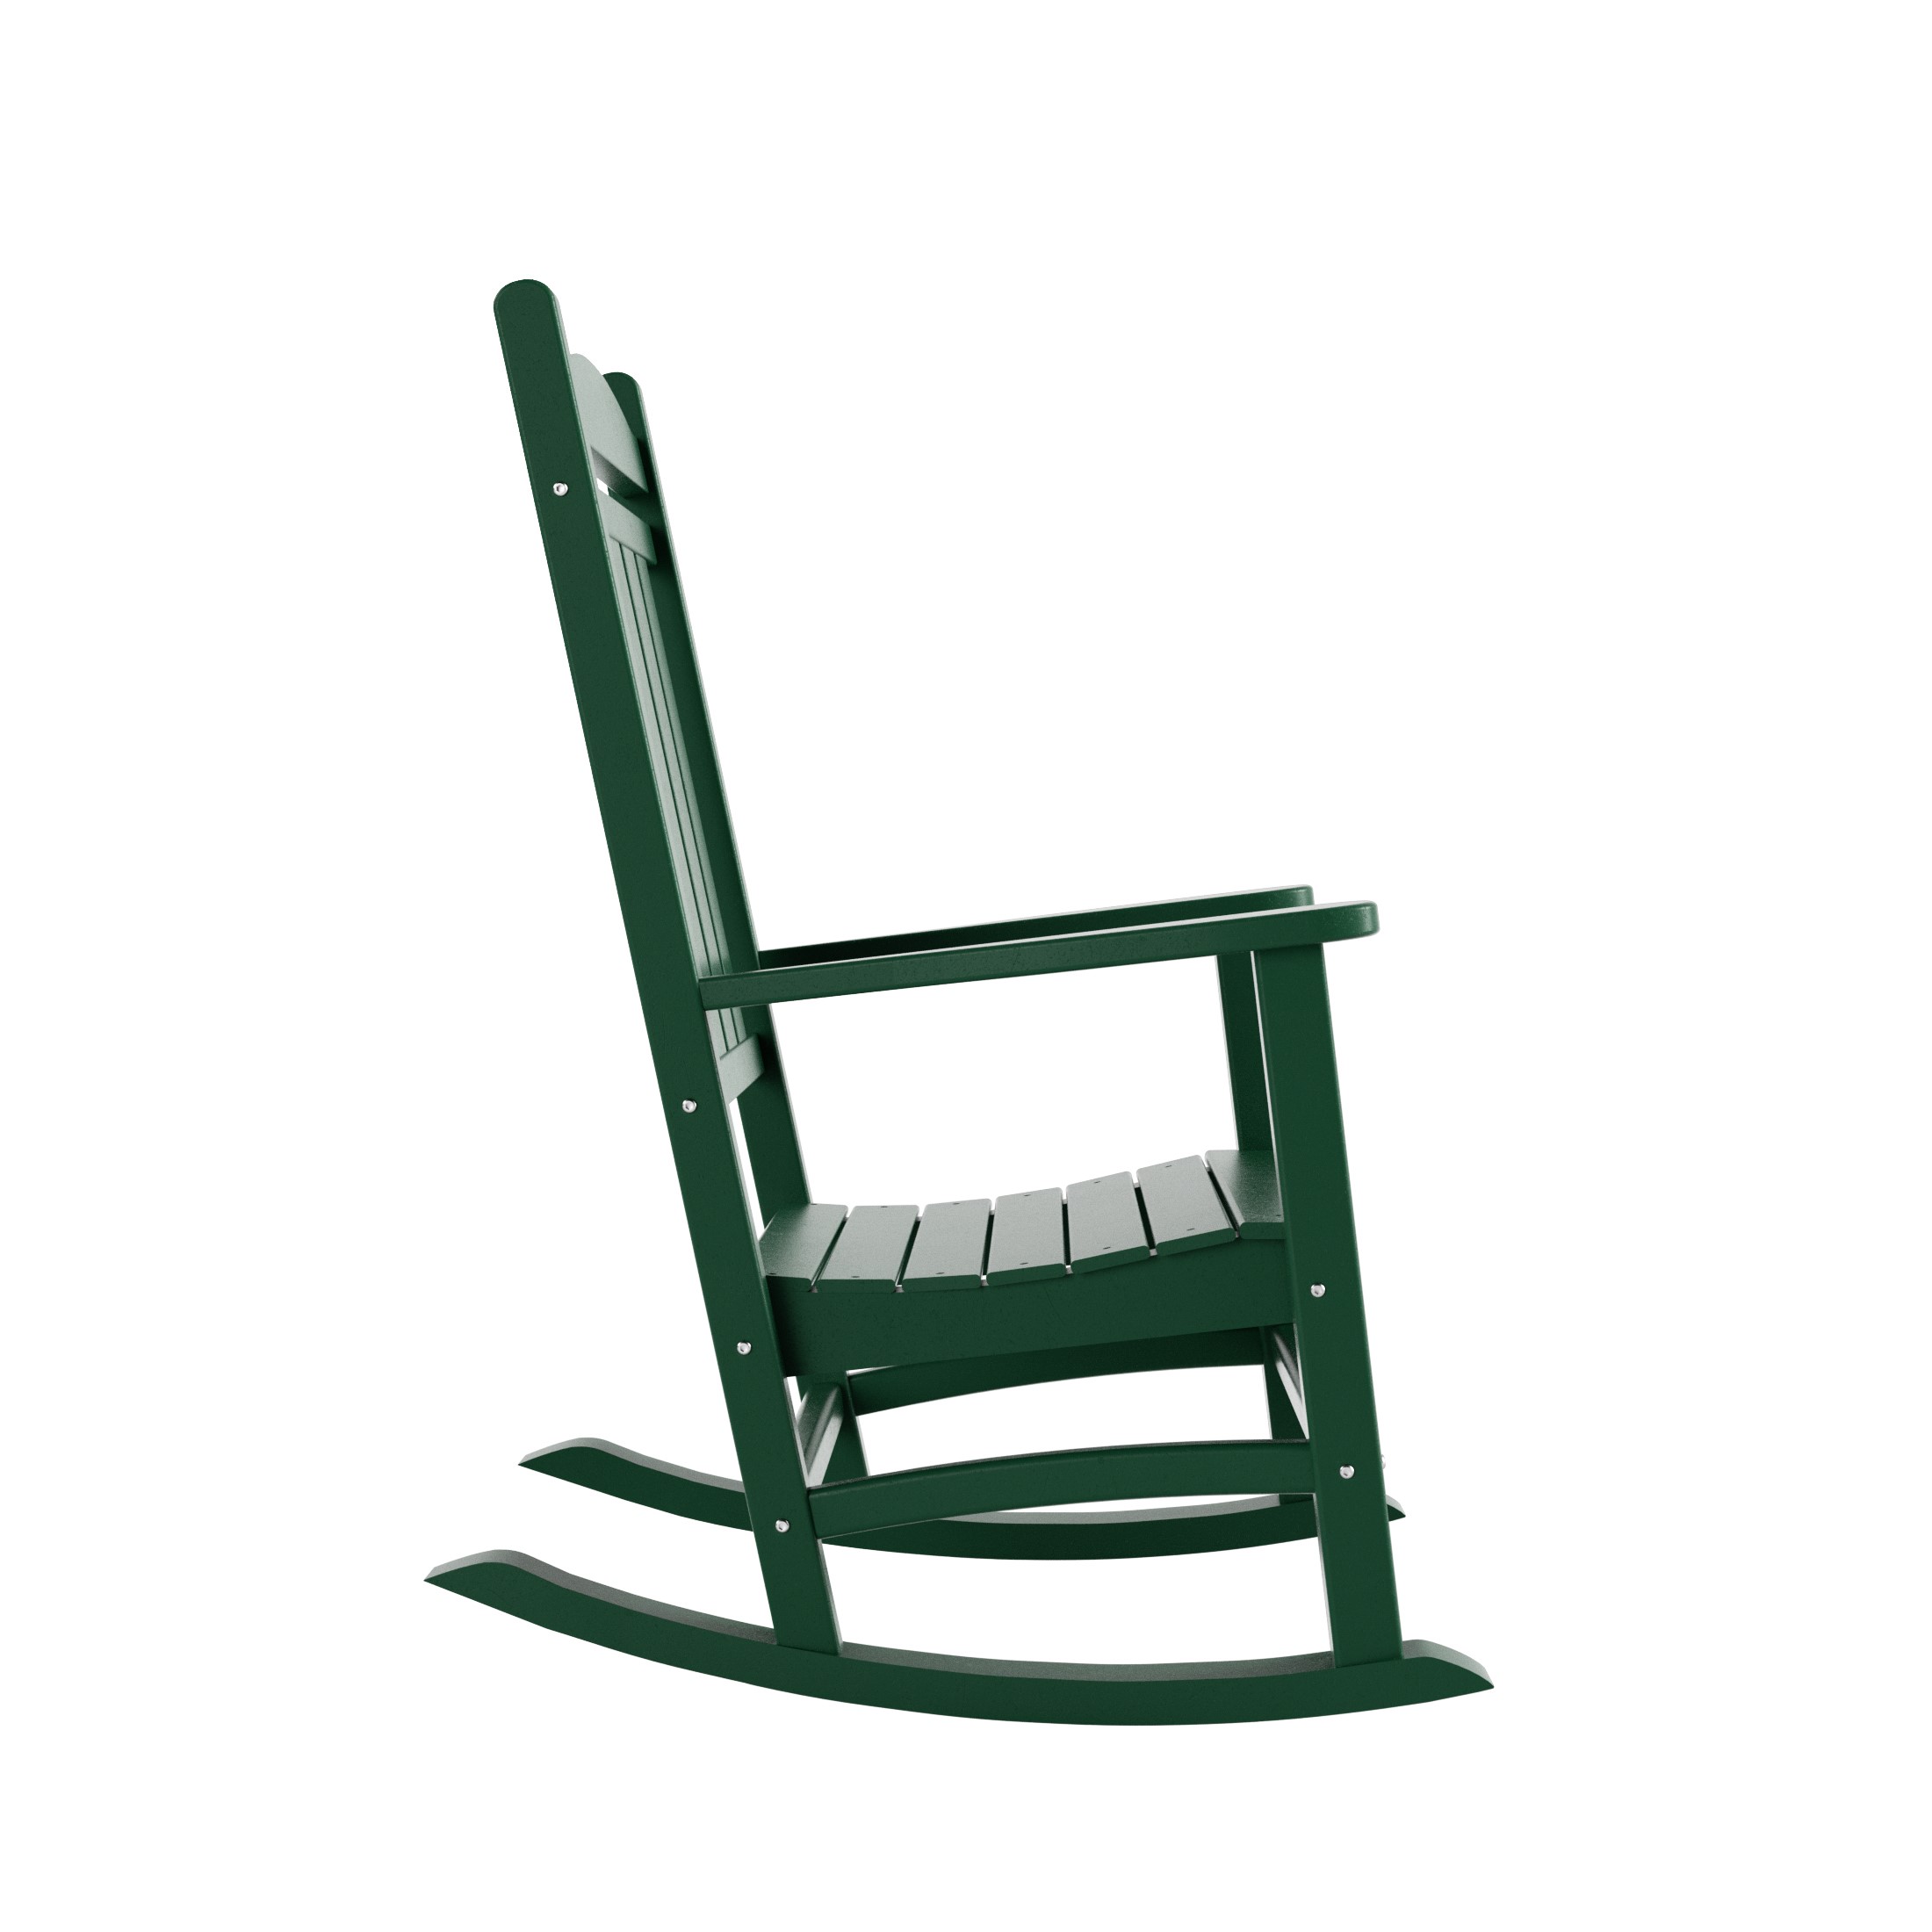 Costaelm Paradise Classic Plastic Porch Rocking Chair, Dark Green - image 4 of 9